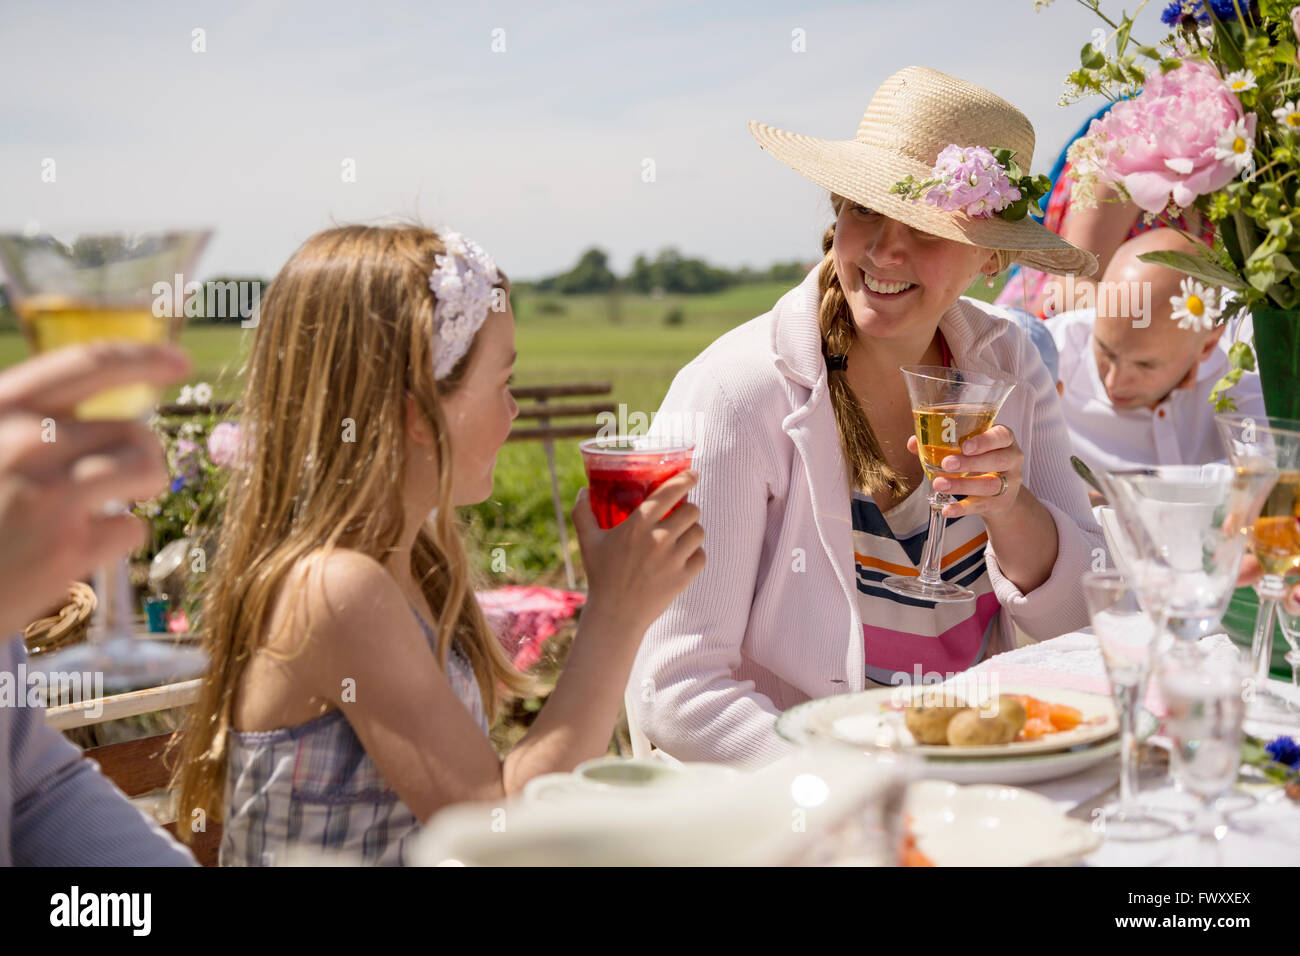 Sweden, Skane, Family with one child (8-9) during midsummer celebrations Stock Photo